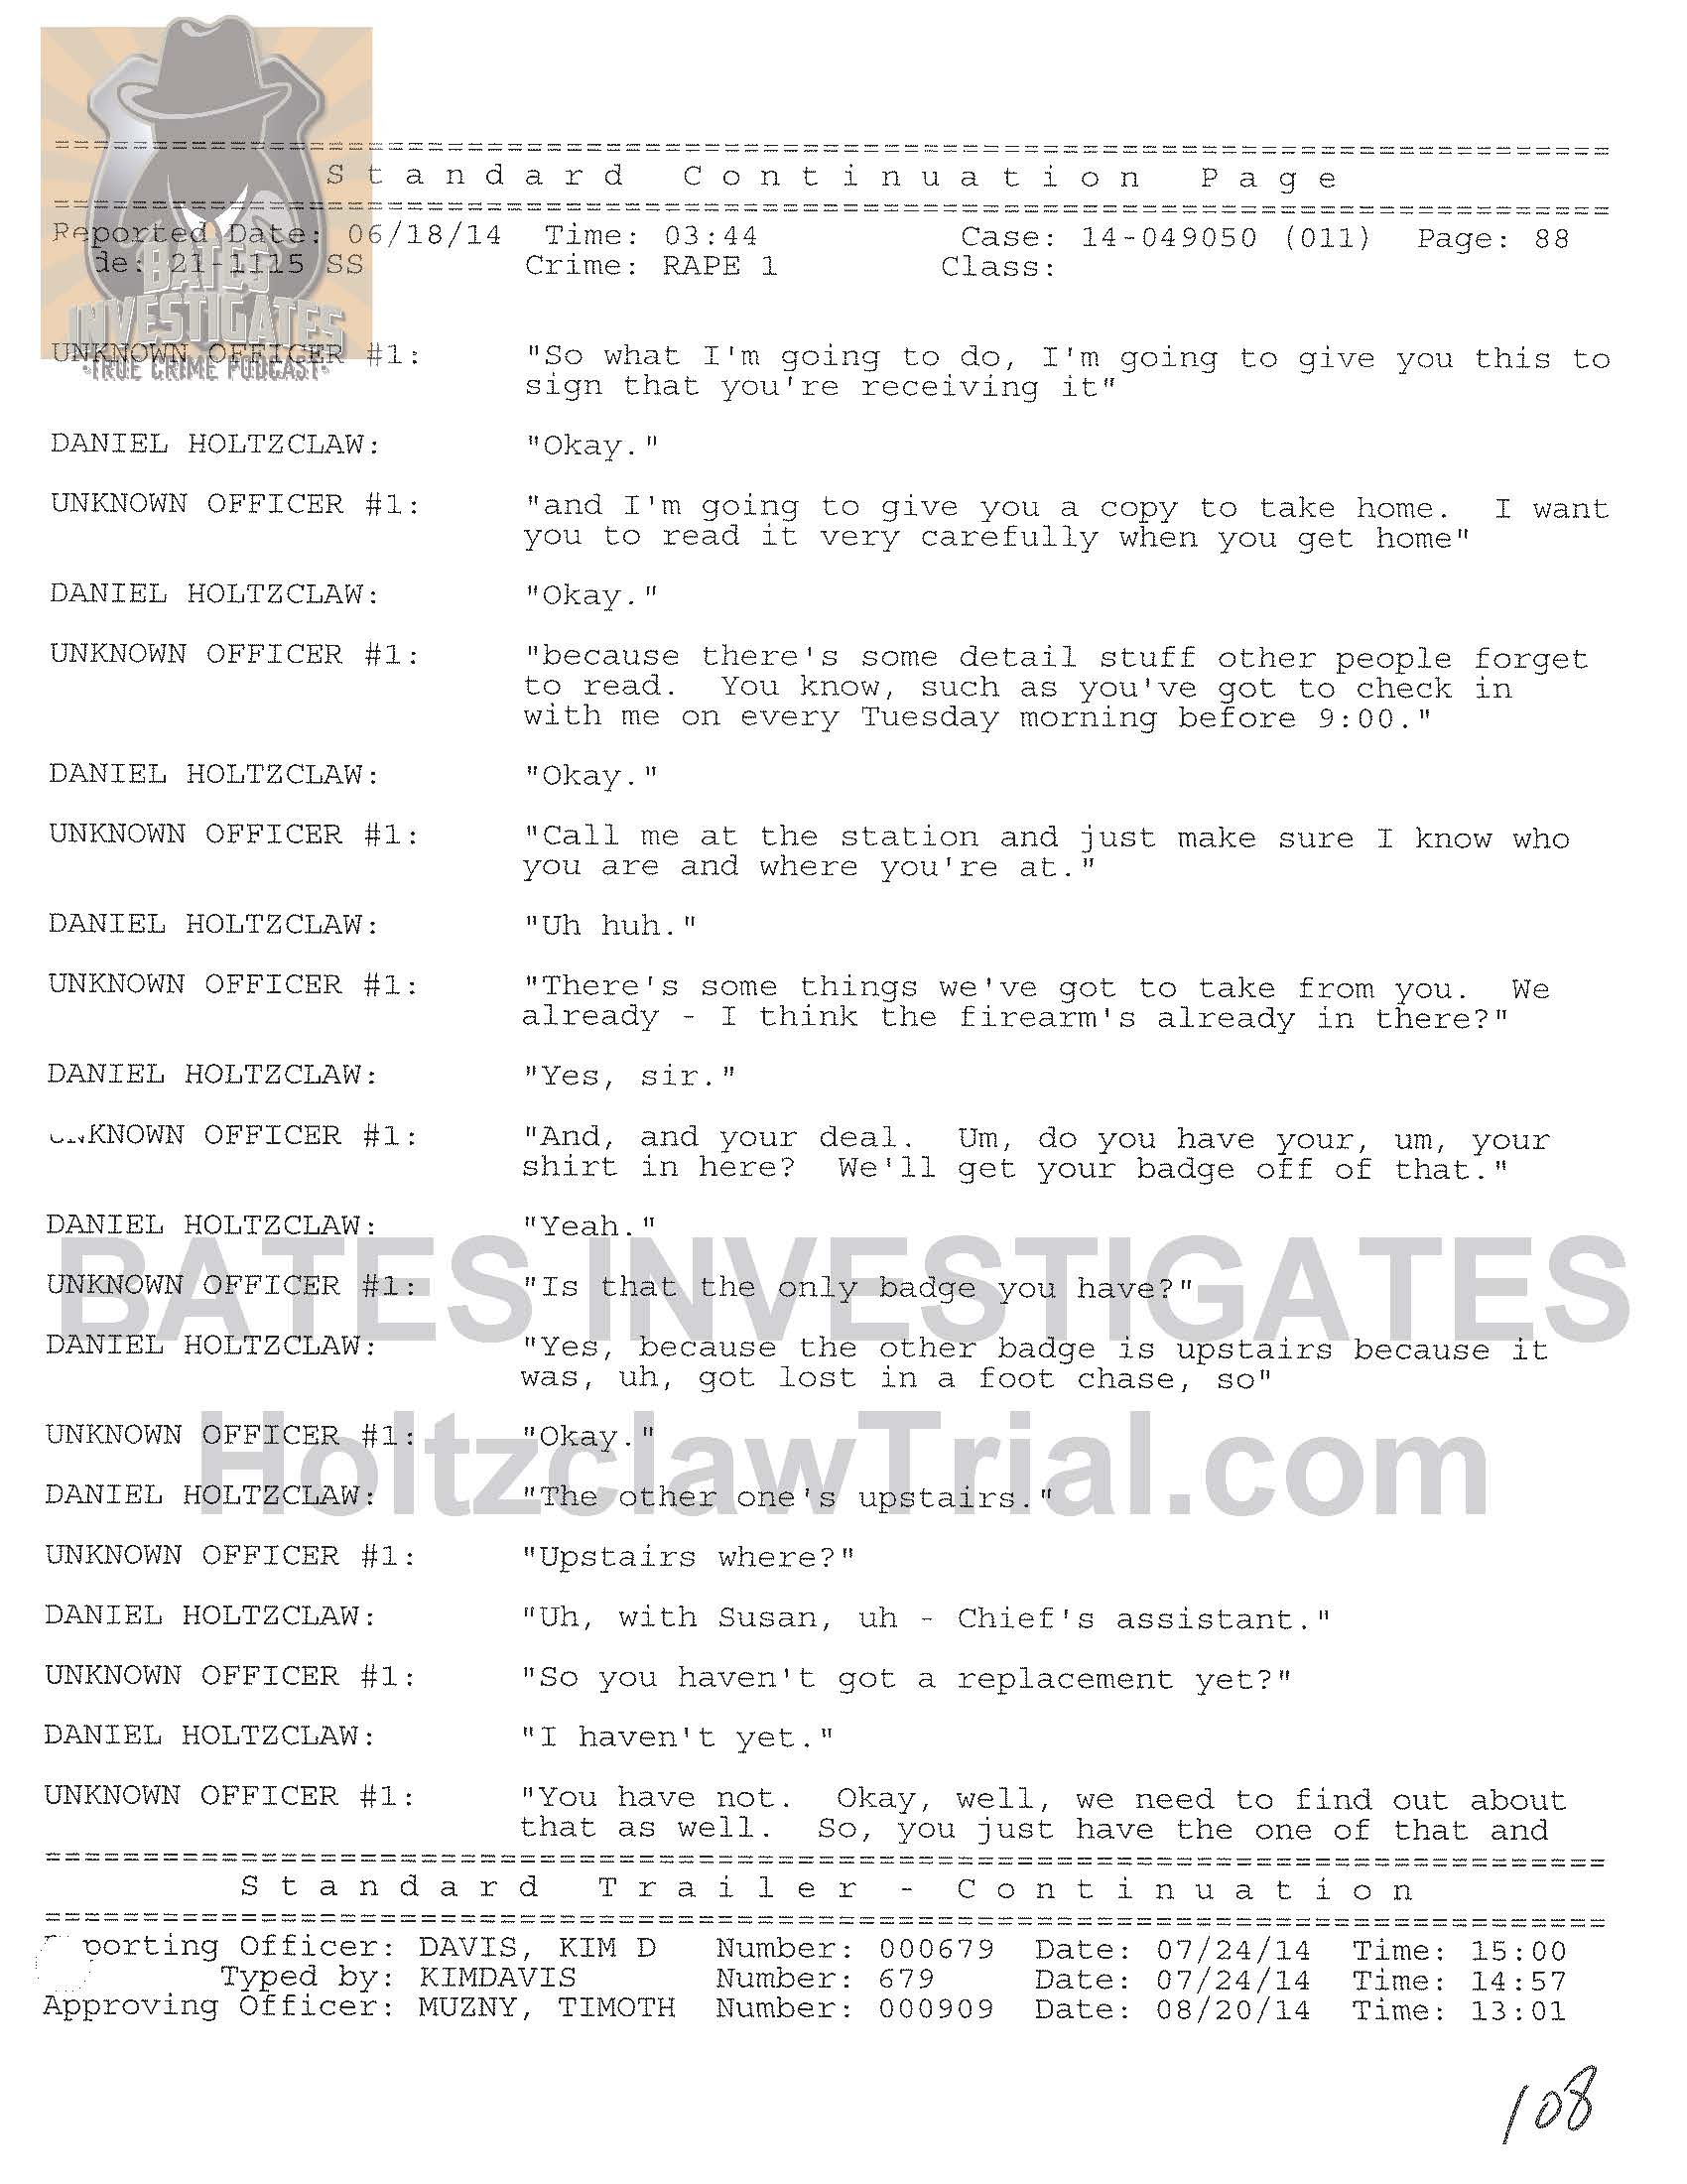 Holtzclaw Interrogation Transcript - Ep02 Redacted_Page_88.jpg